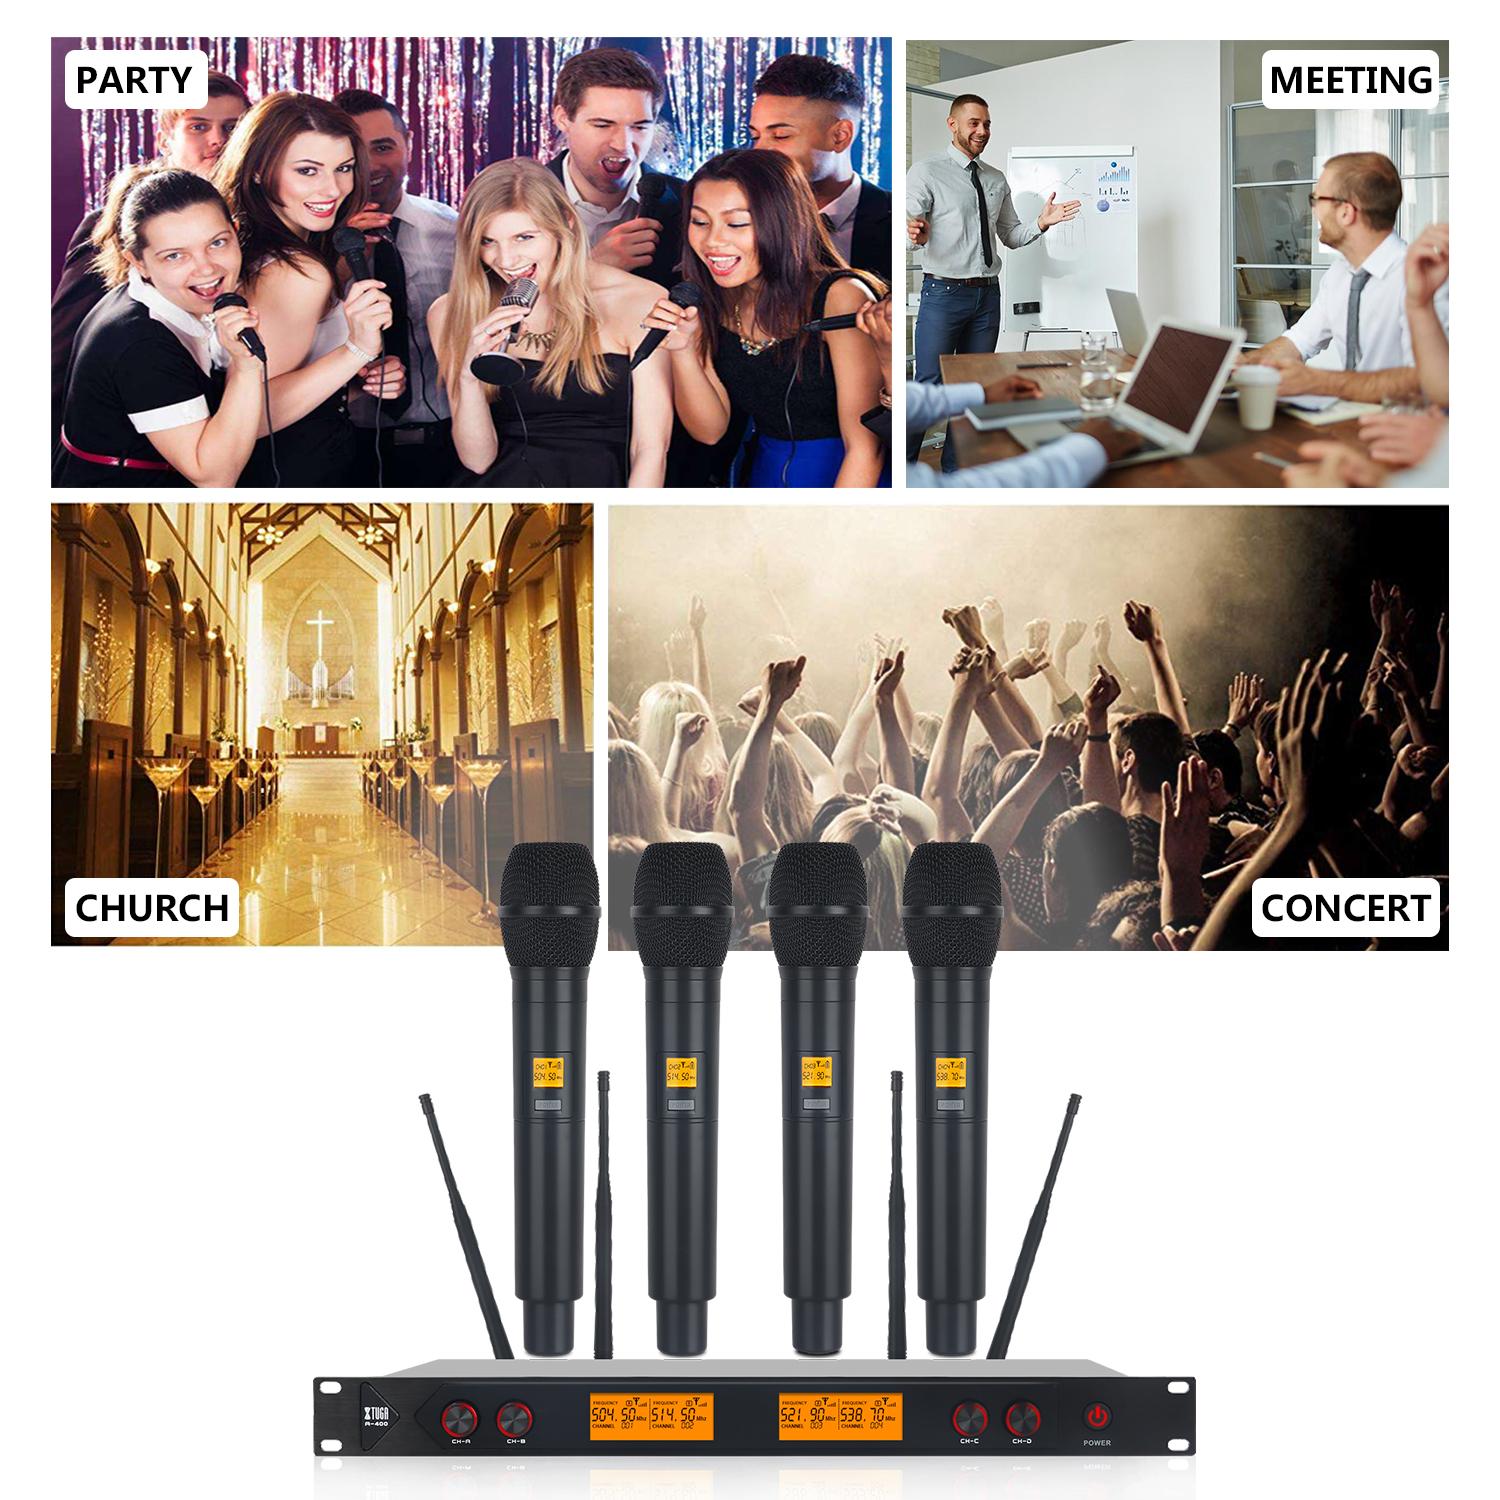 XTUGA A400 Metal Material 4-Channel UHF Wireless Microphone System with 4 Hand-held for Stage Church Use for Family Party Small Karaoke Night B Church 